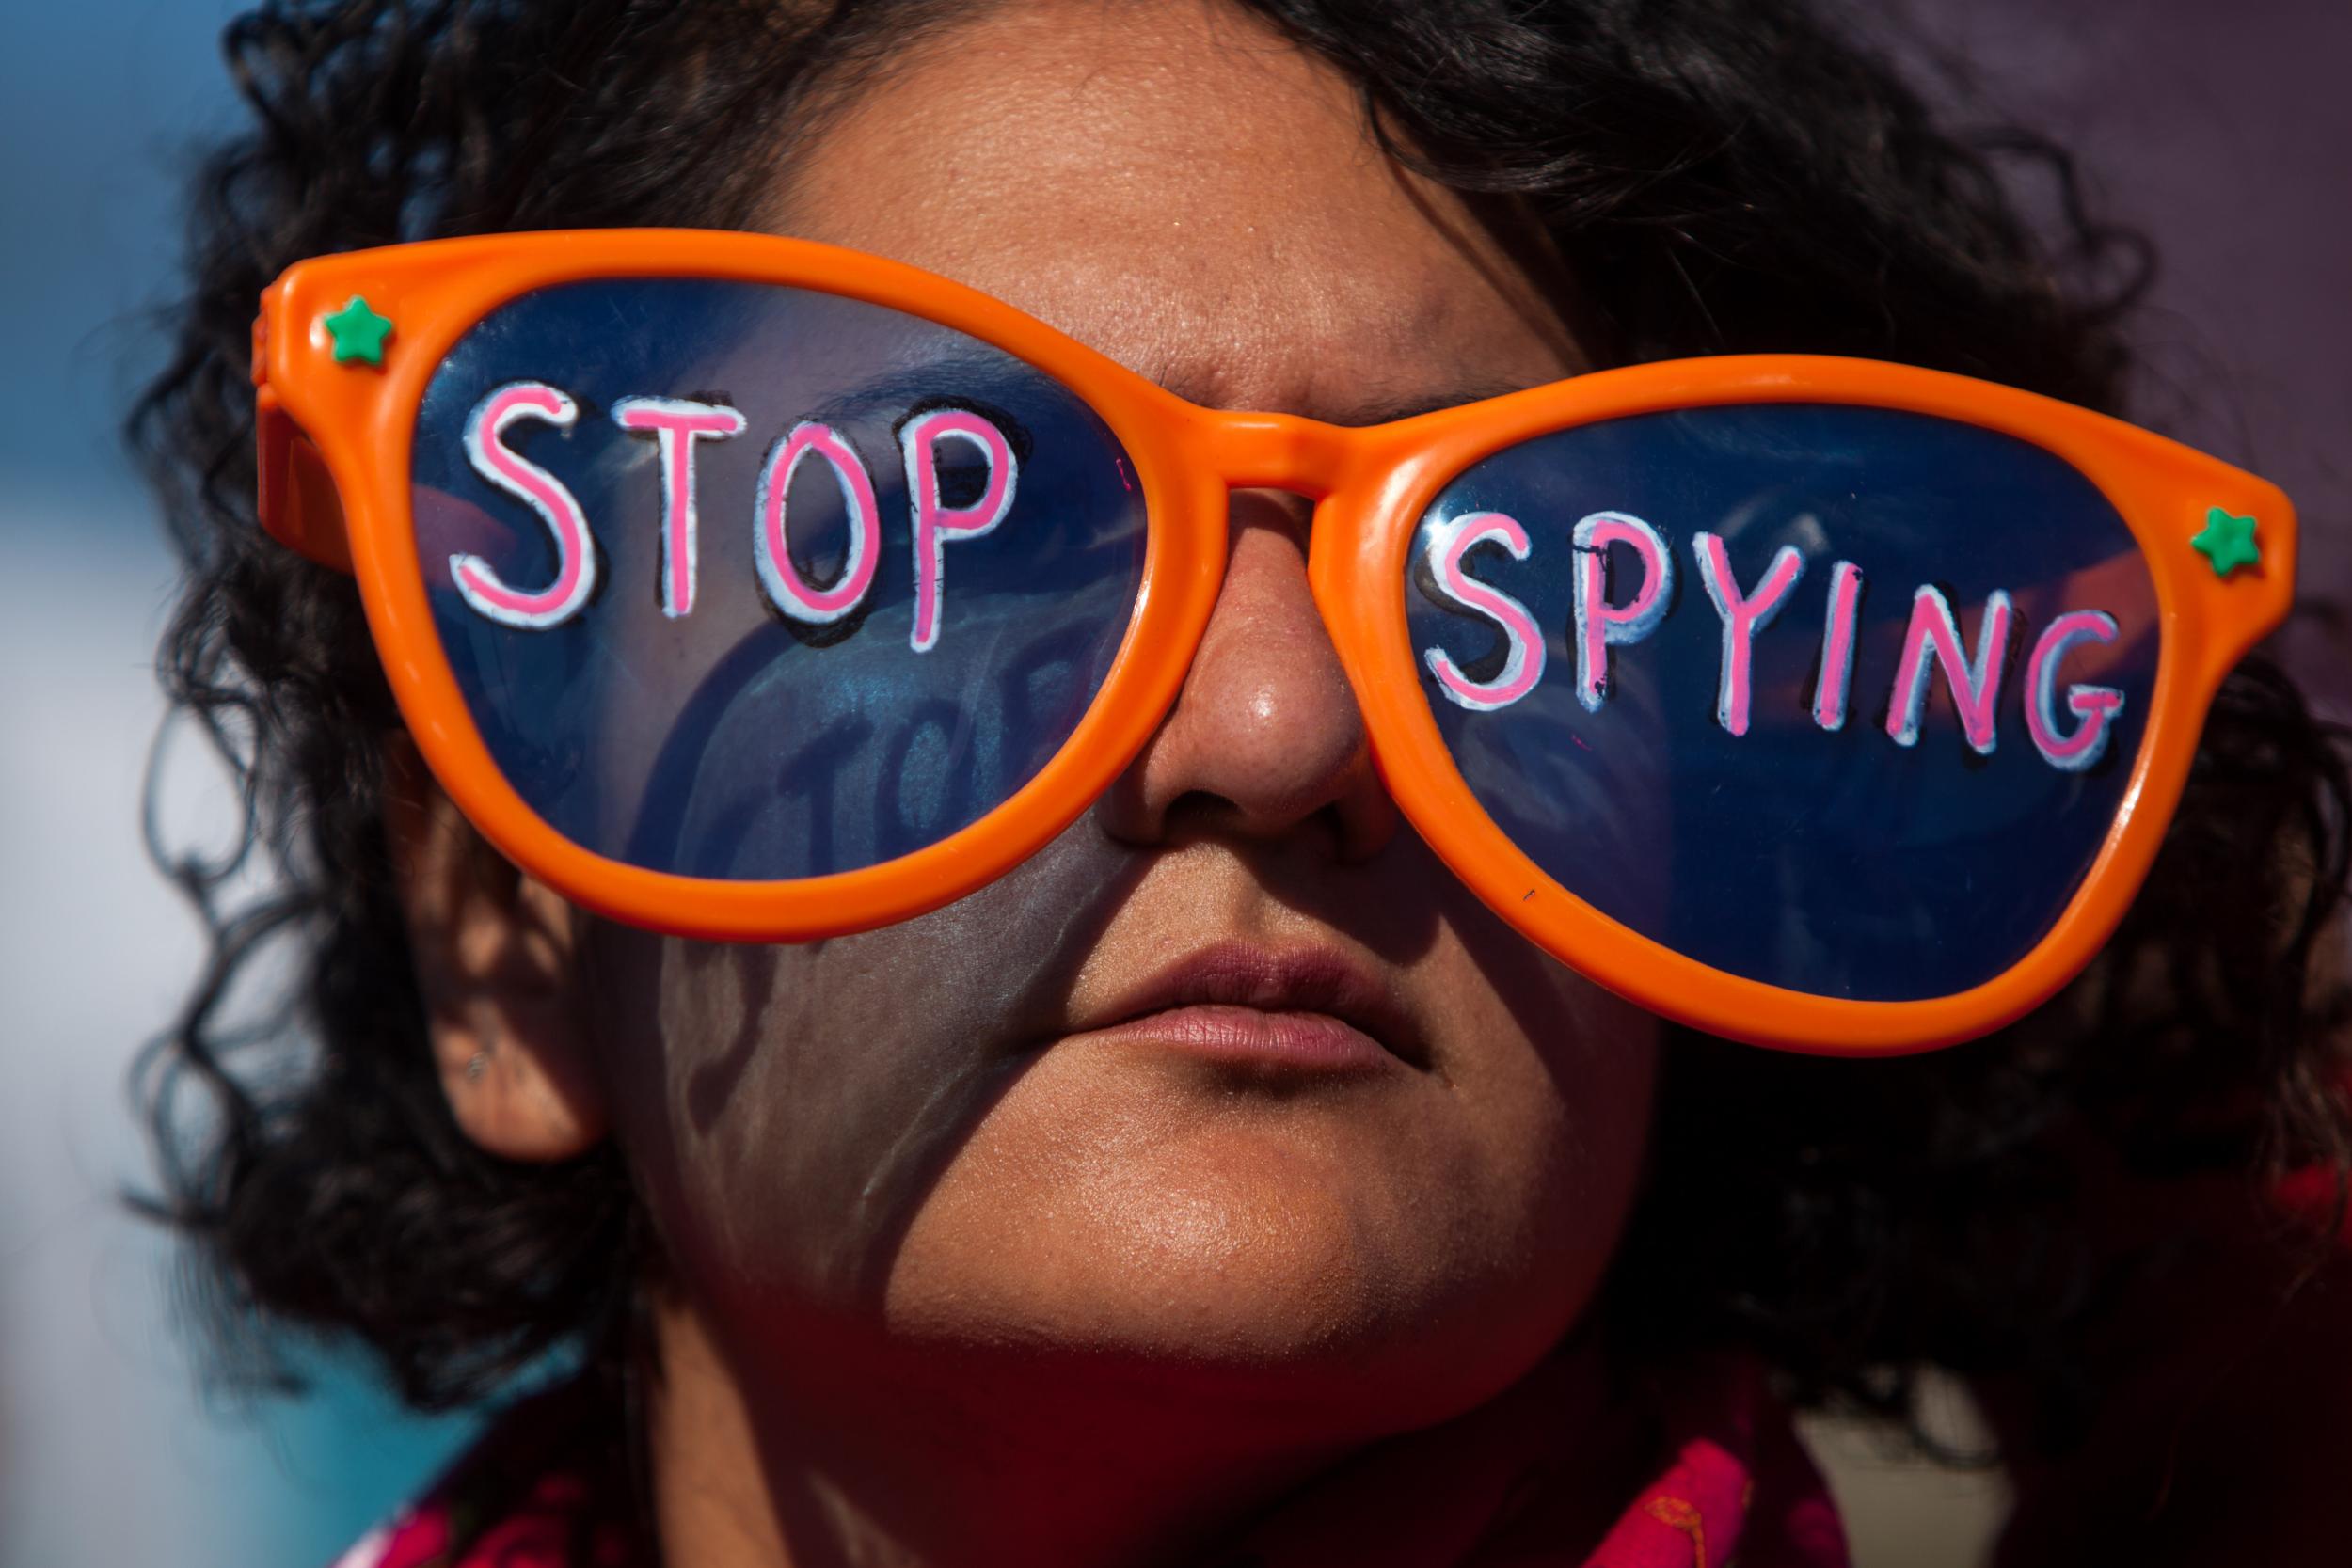 A woman protests against NSA surveillance in front of the US Capitol building in Washington, D.C. in 2013